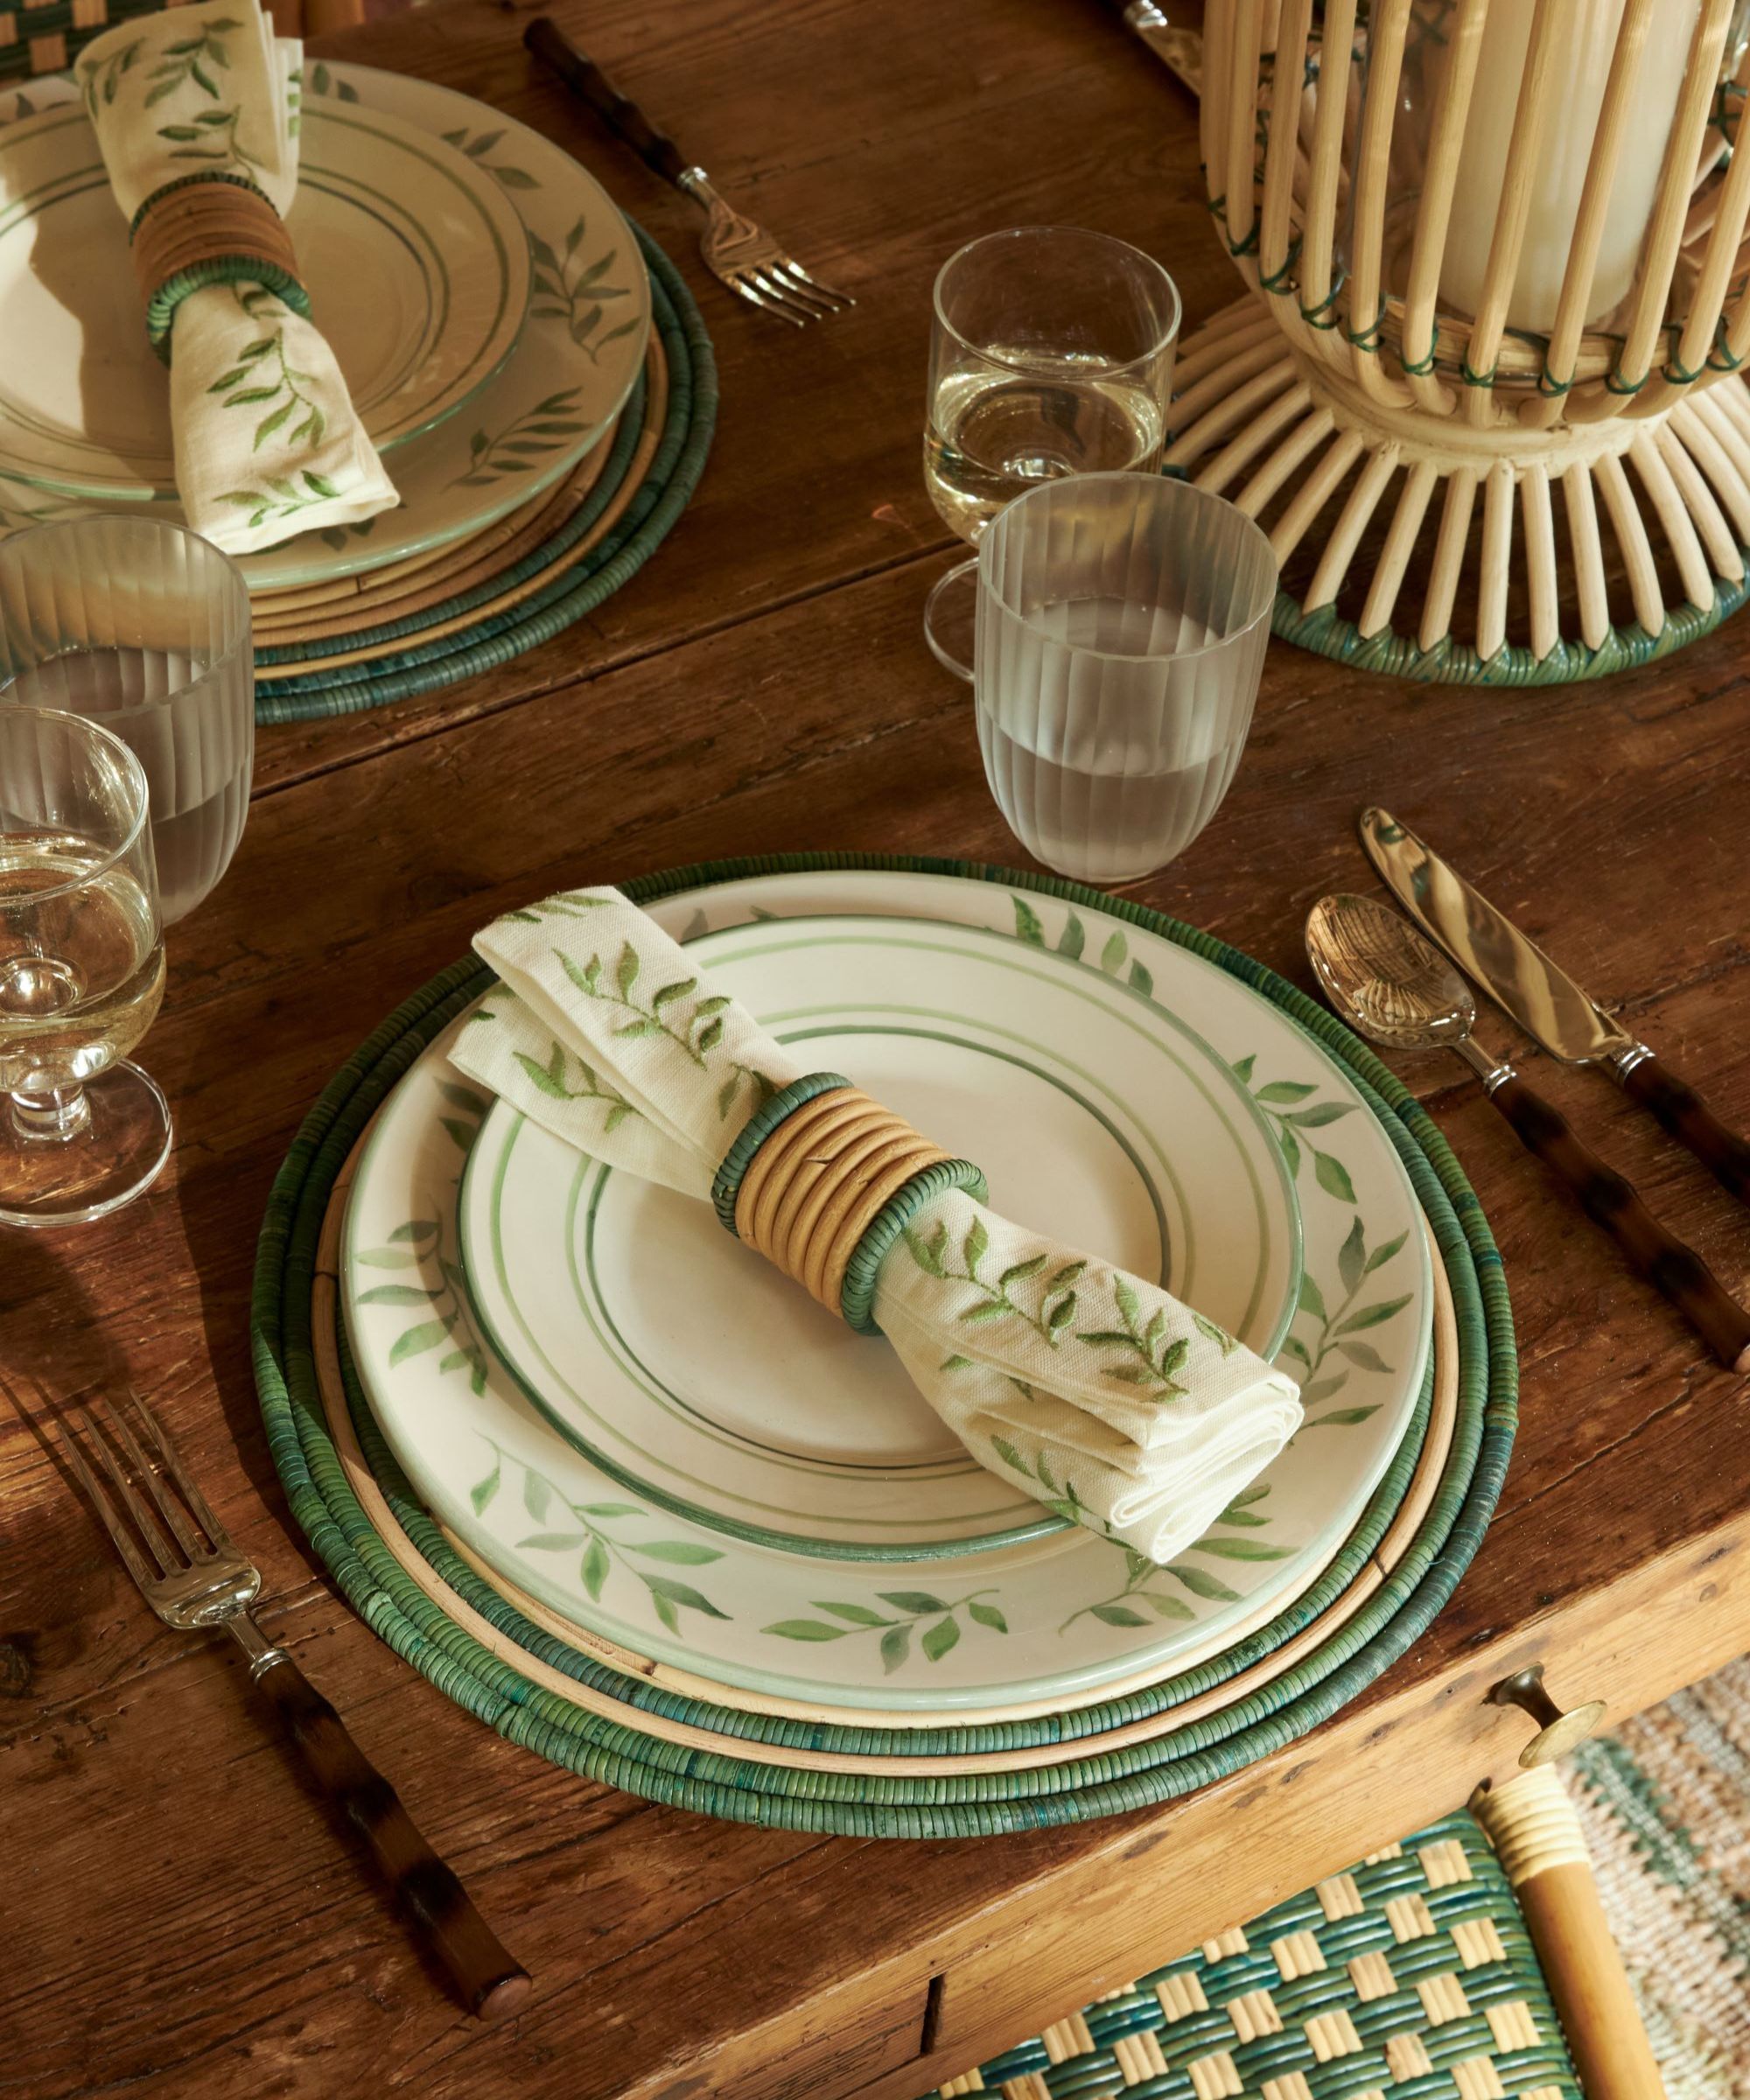 white dinner plates with green leaf design and matching serviette